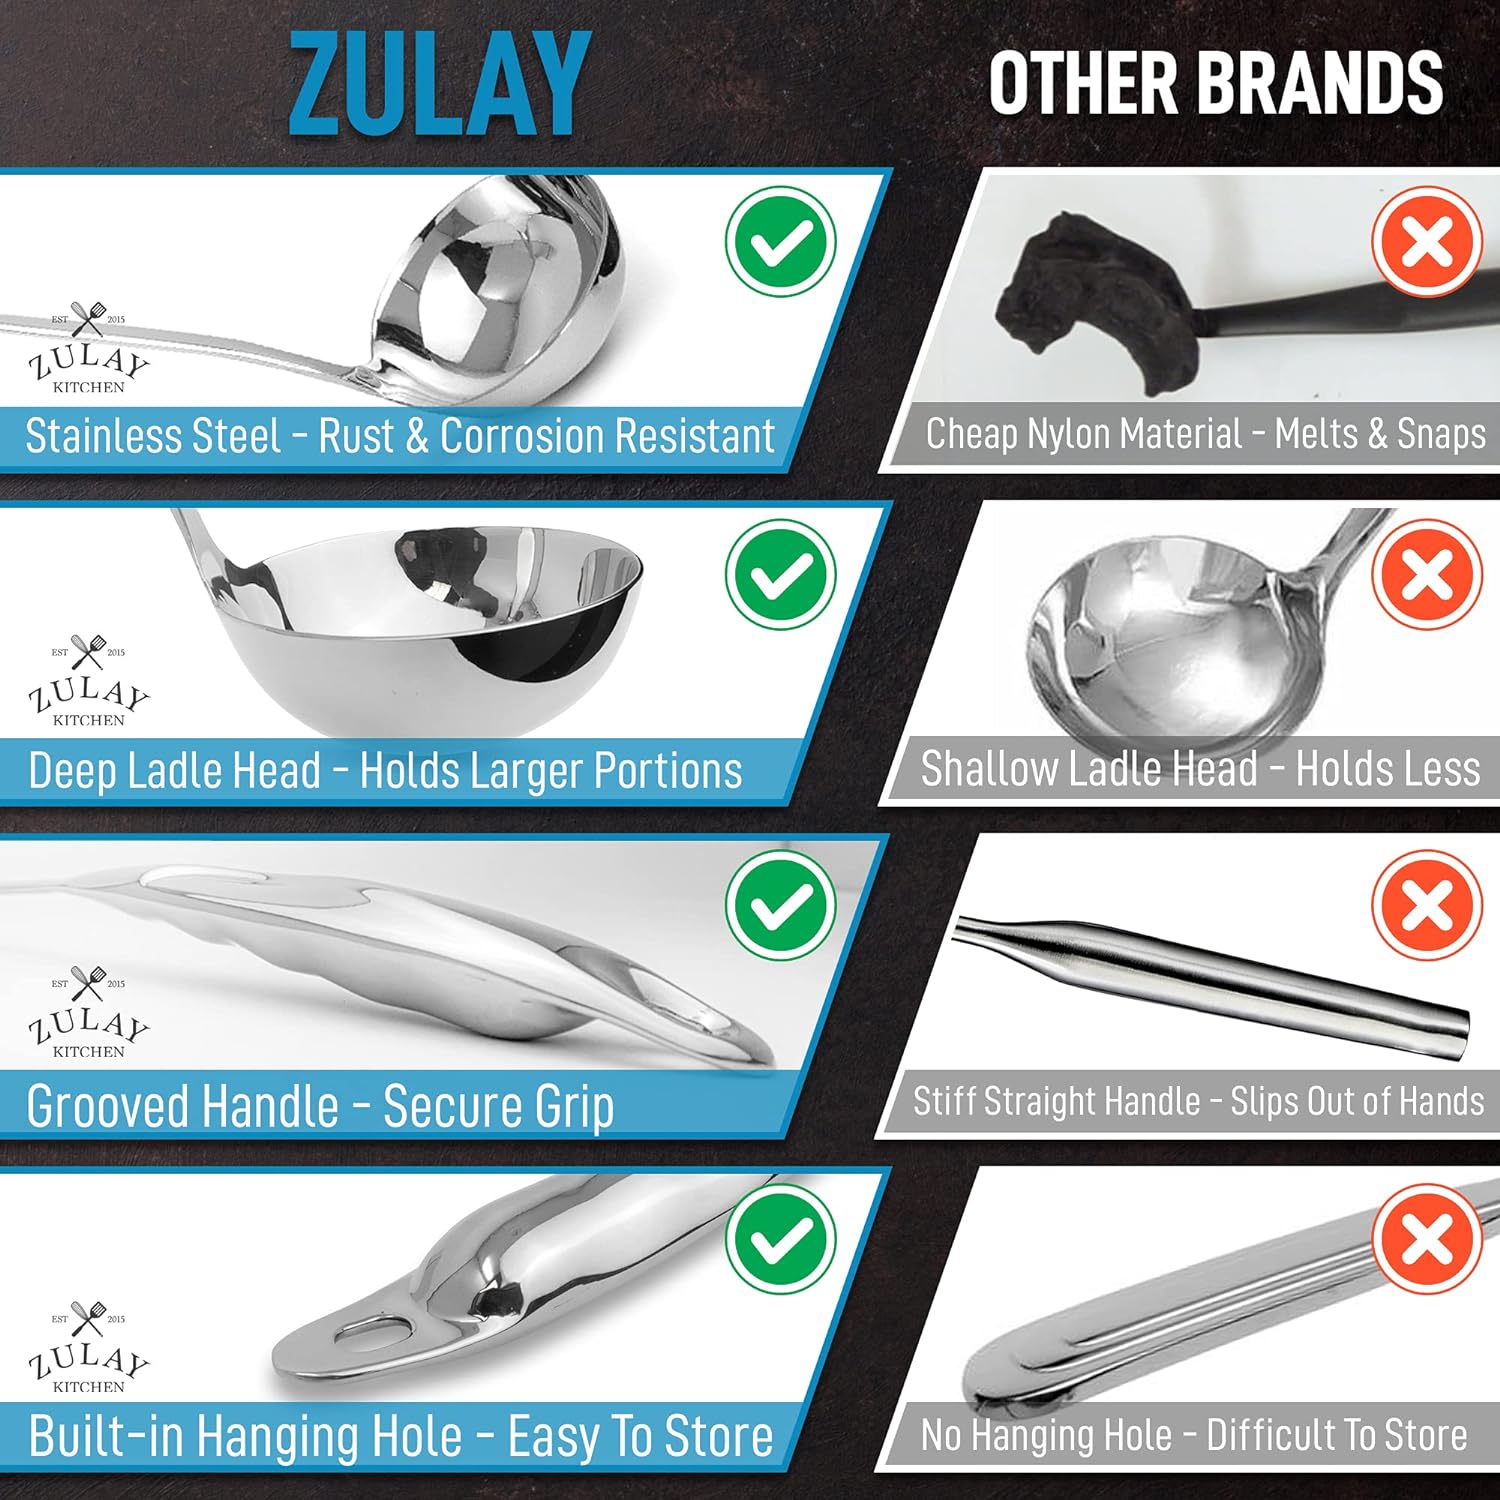 Zulay Kitchen Stainless Steel Tongs - 12 inch